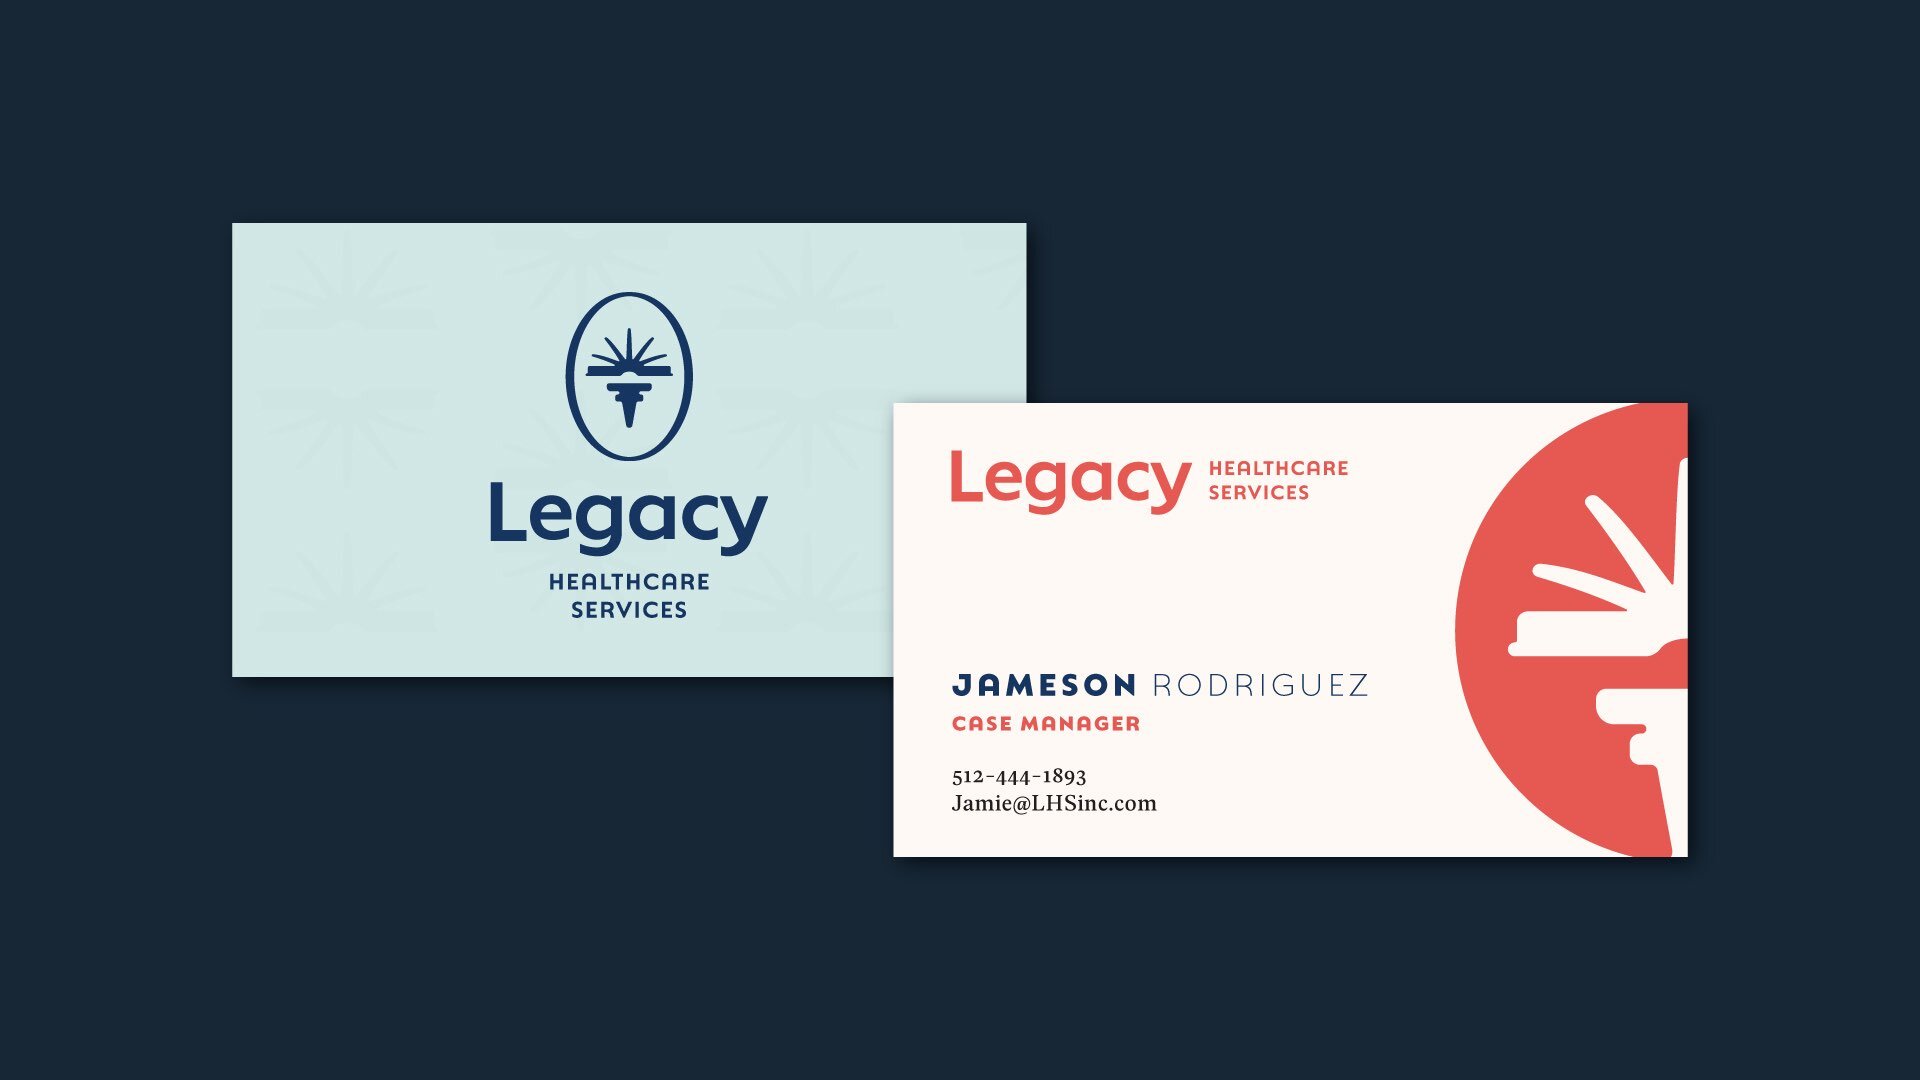 Legacy Healthcare Services rebrand logo design applied to business cards